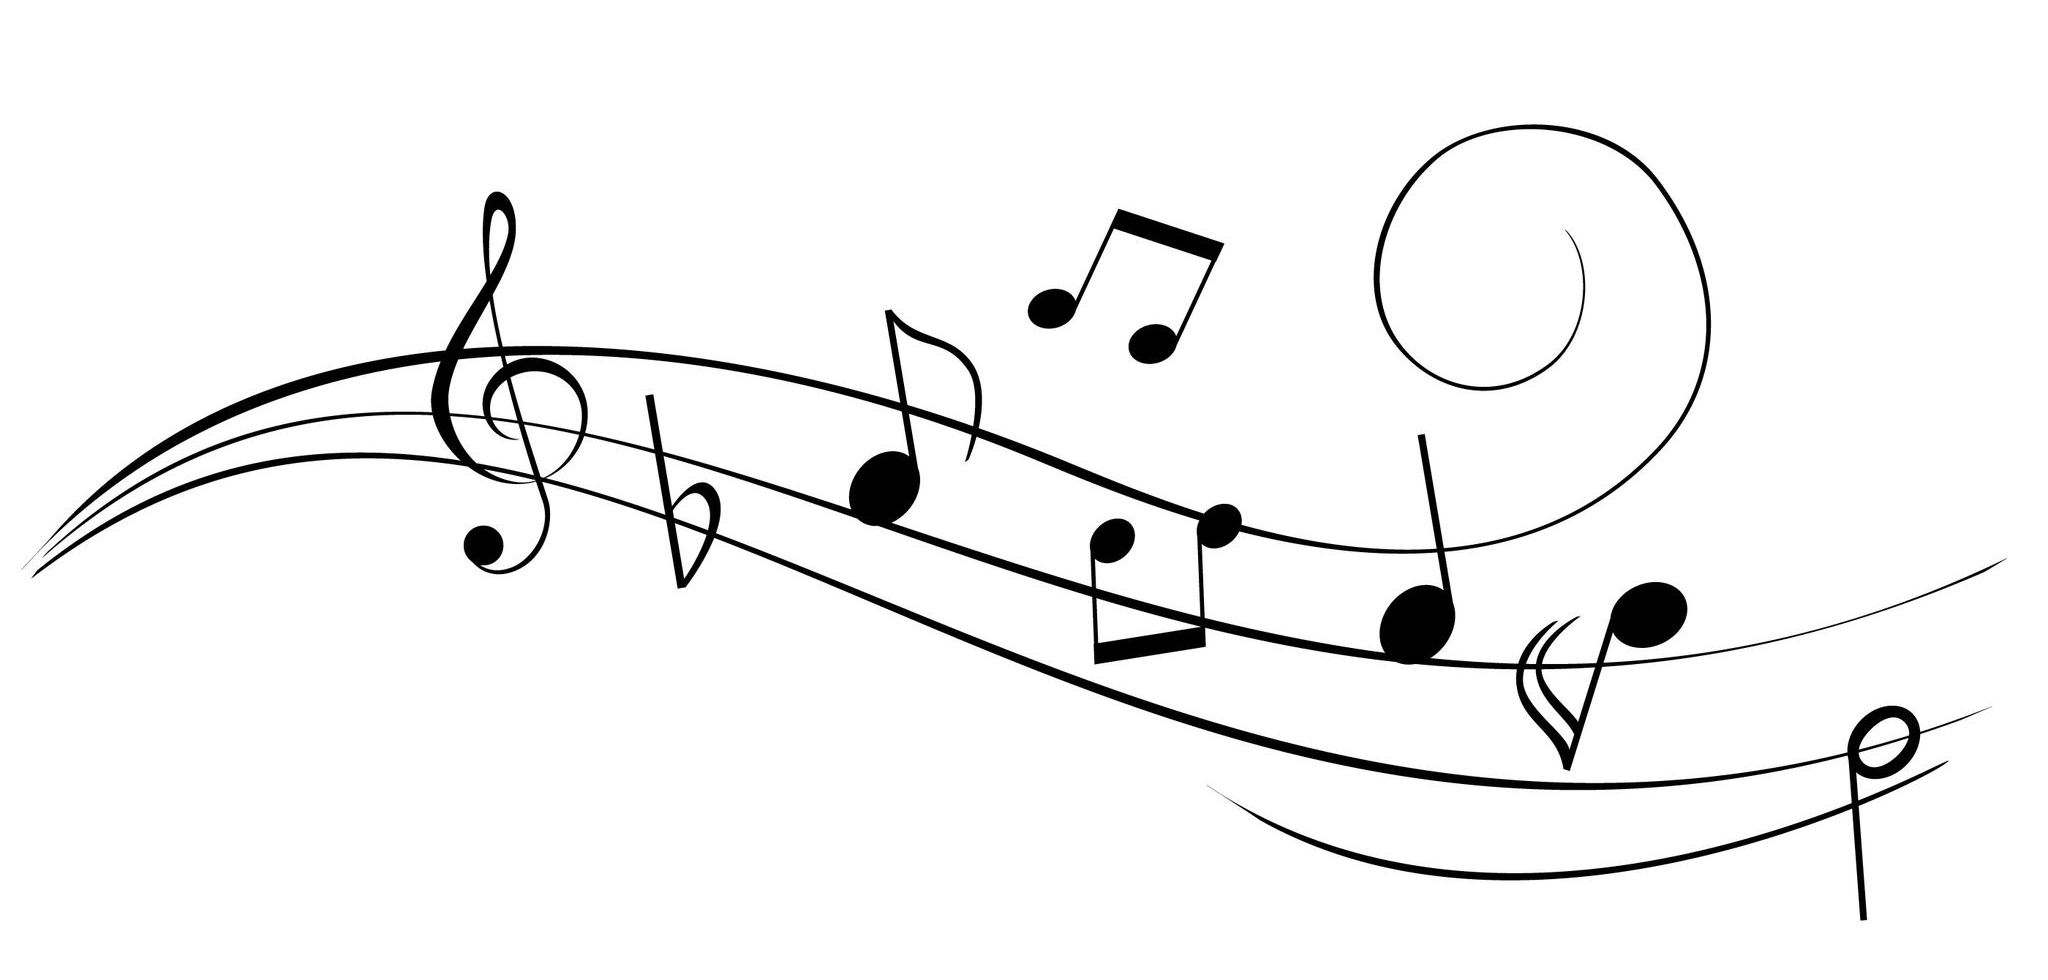 Music Notes Pic - ClipArt Best